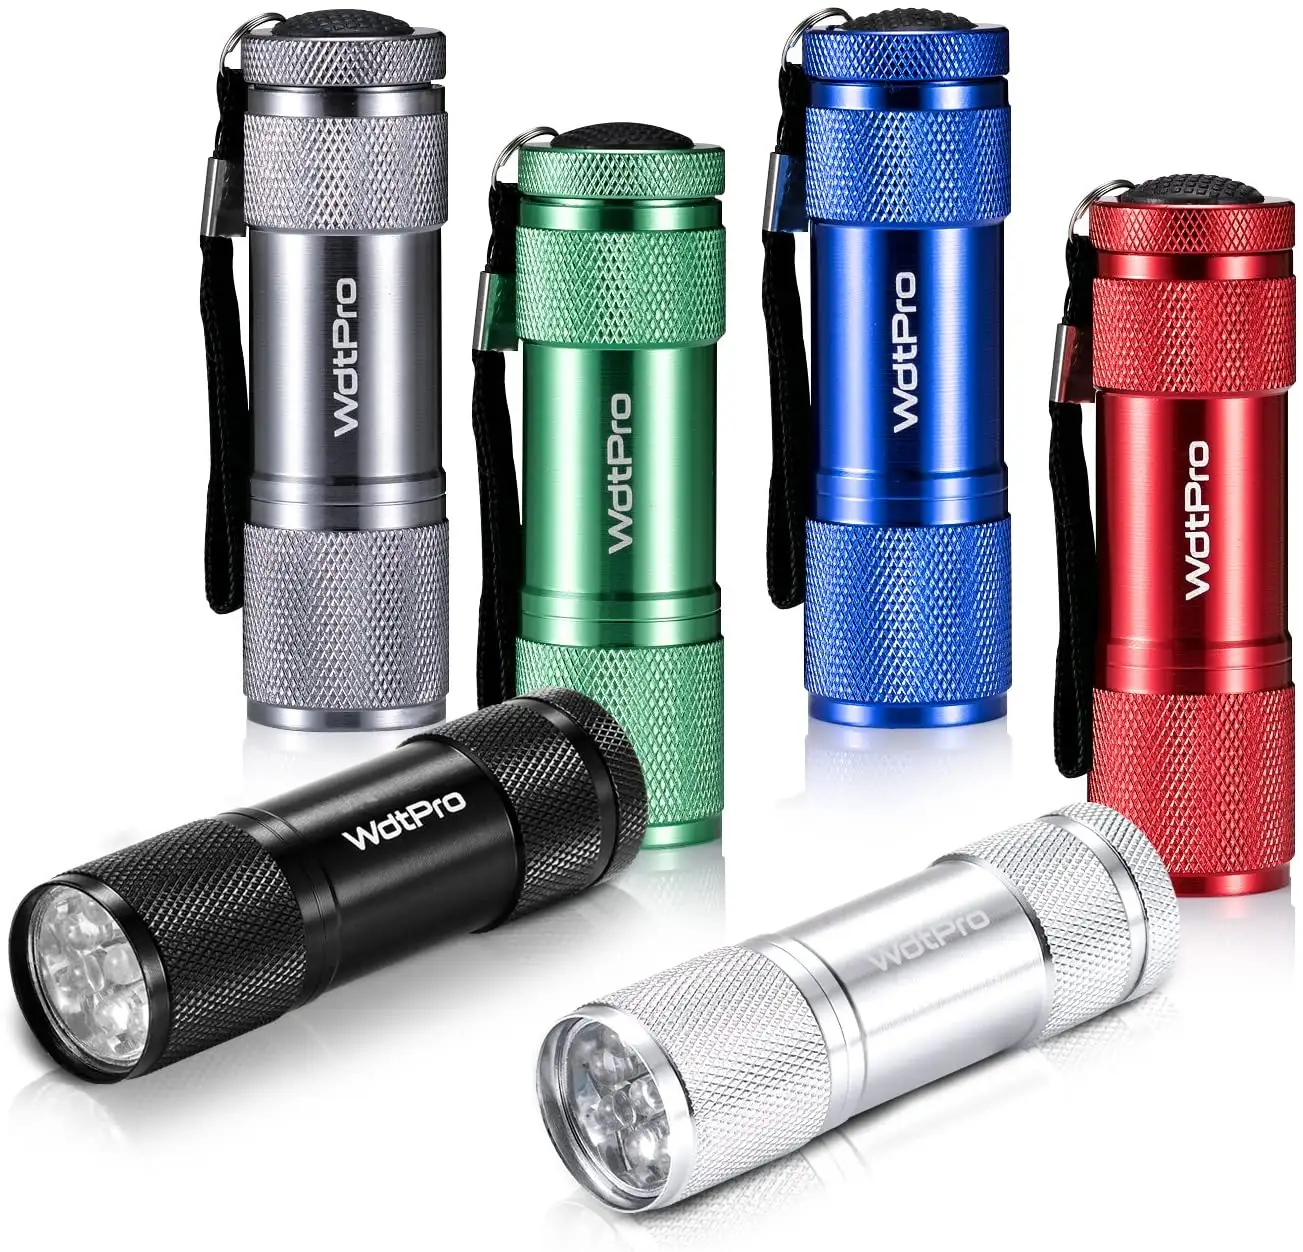 Super Bright LED Mini Flashlights Best Torch Light for Night Reading, Power Outages, Camping Lamp